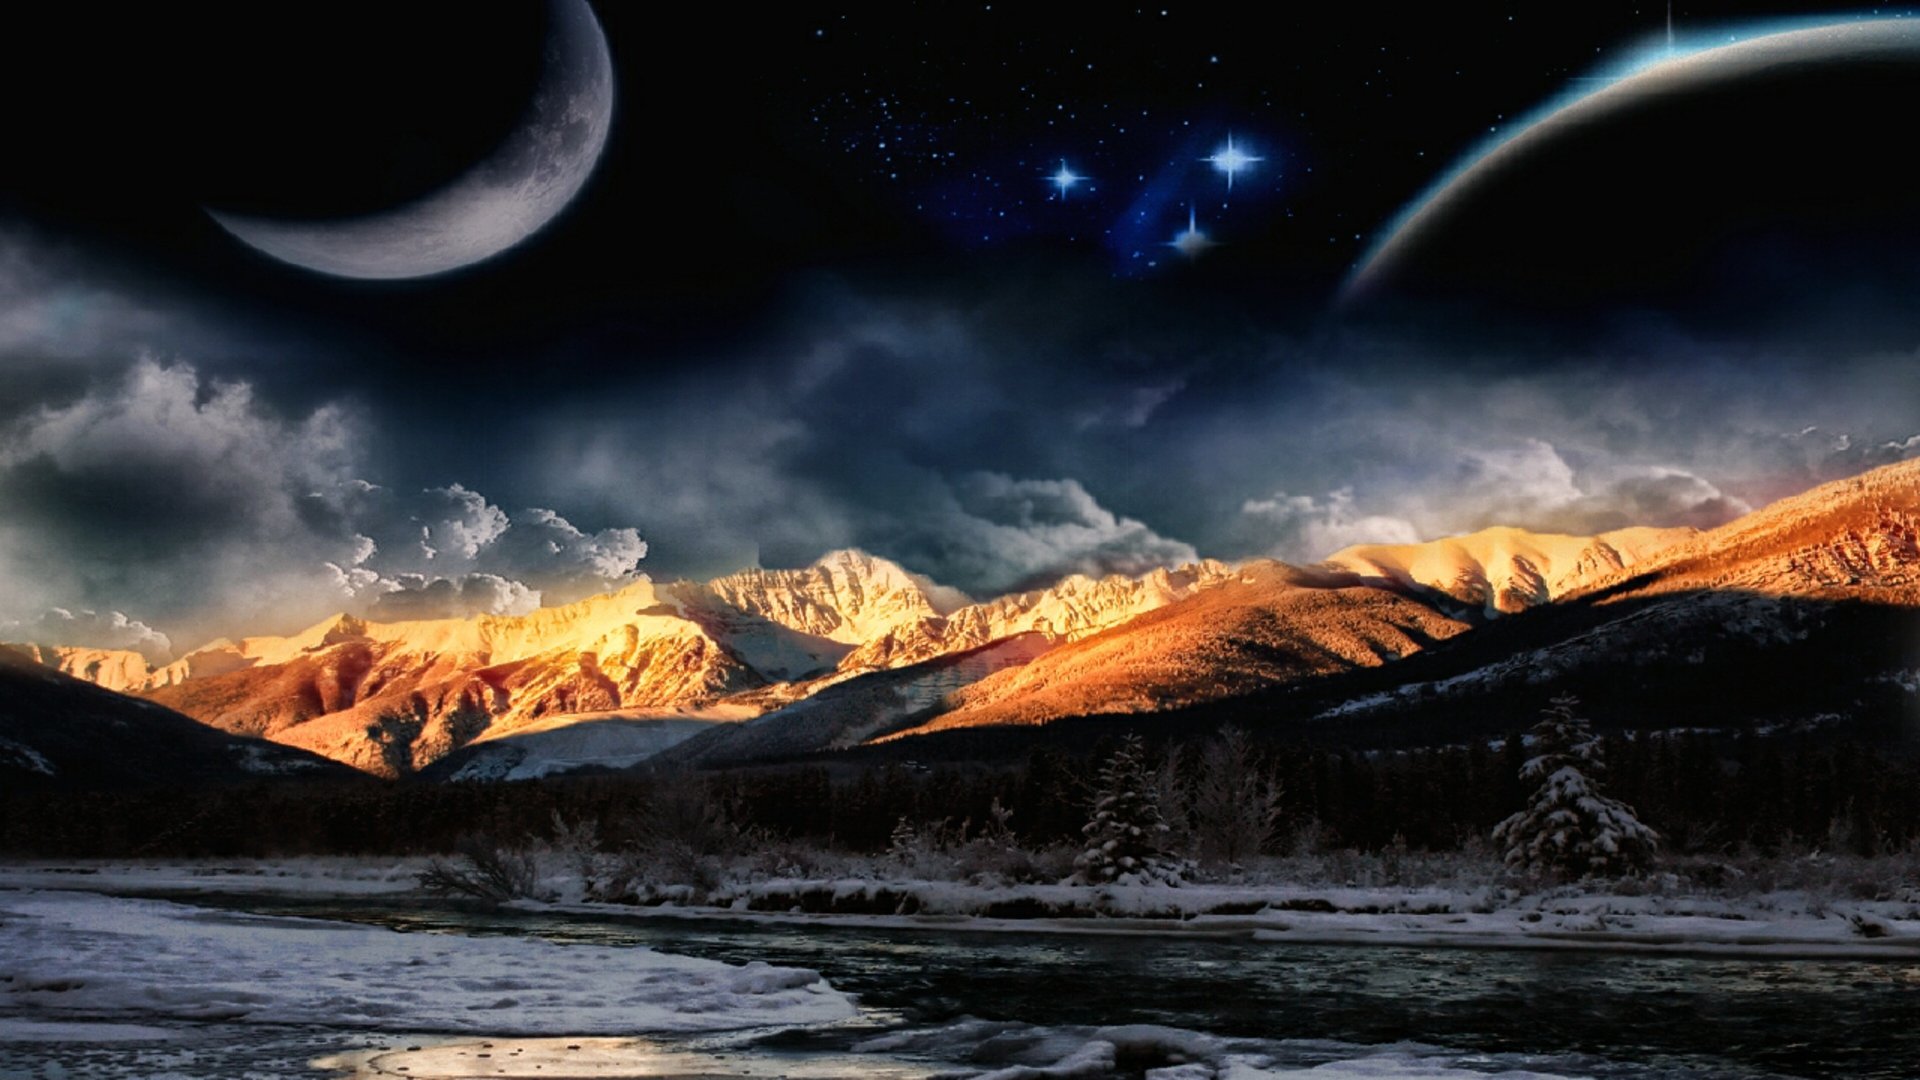 Starry Night Wallpapers | Space Wallpapers Gallery - PC ...